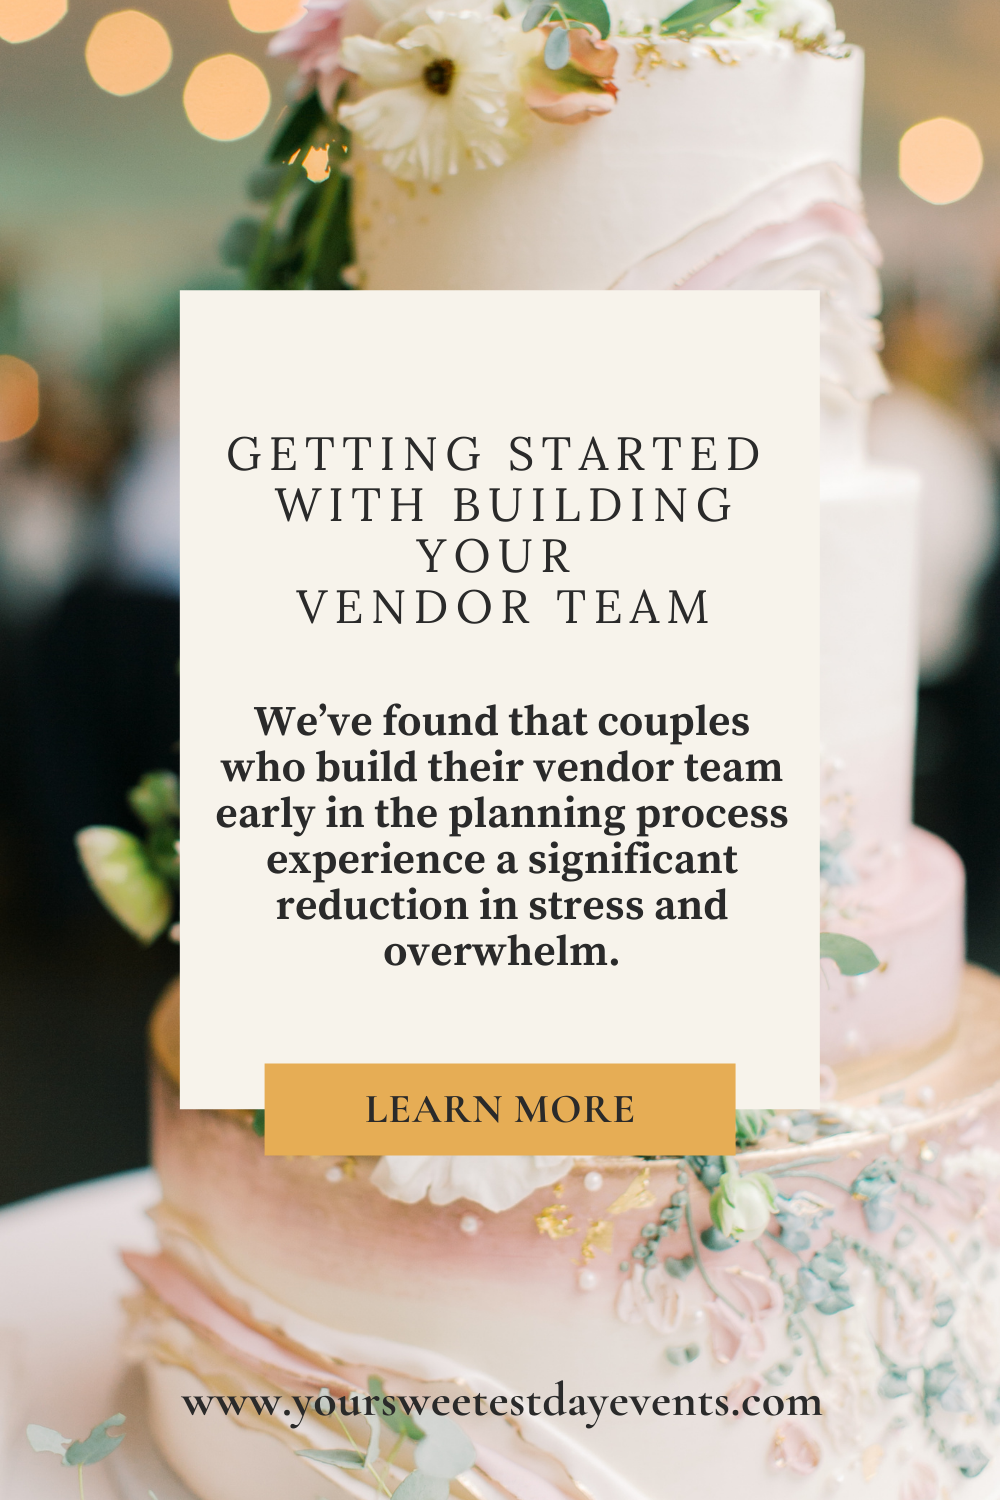 Getting Started with Building your Vendor Team